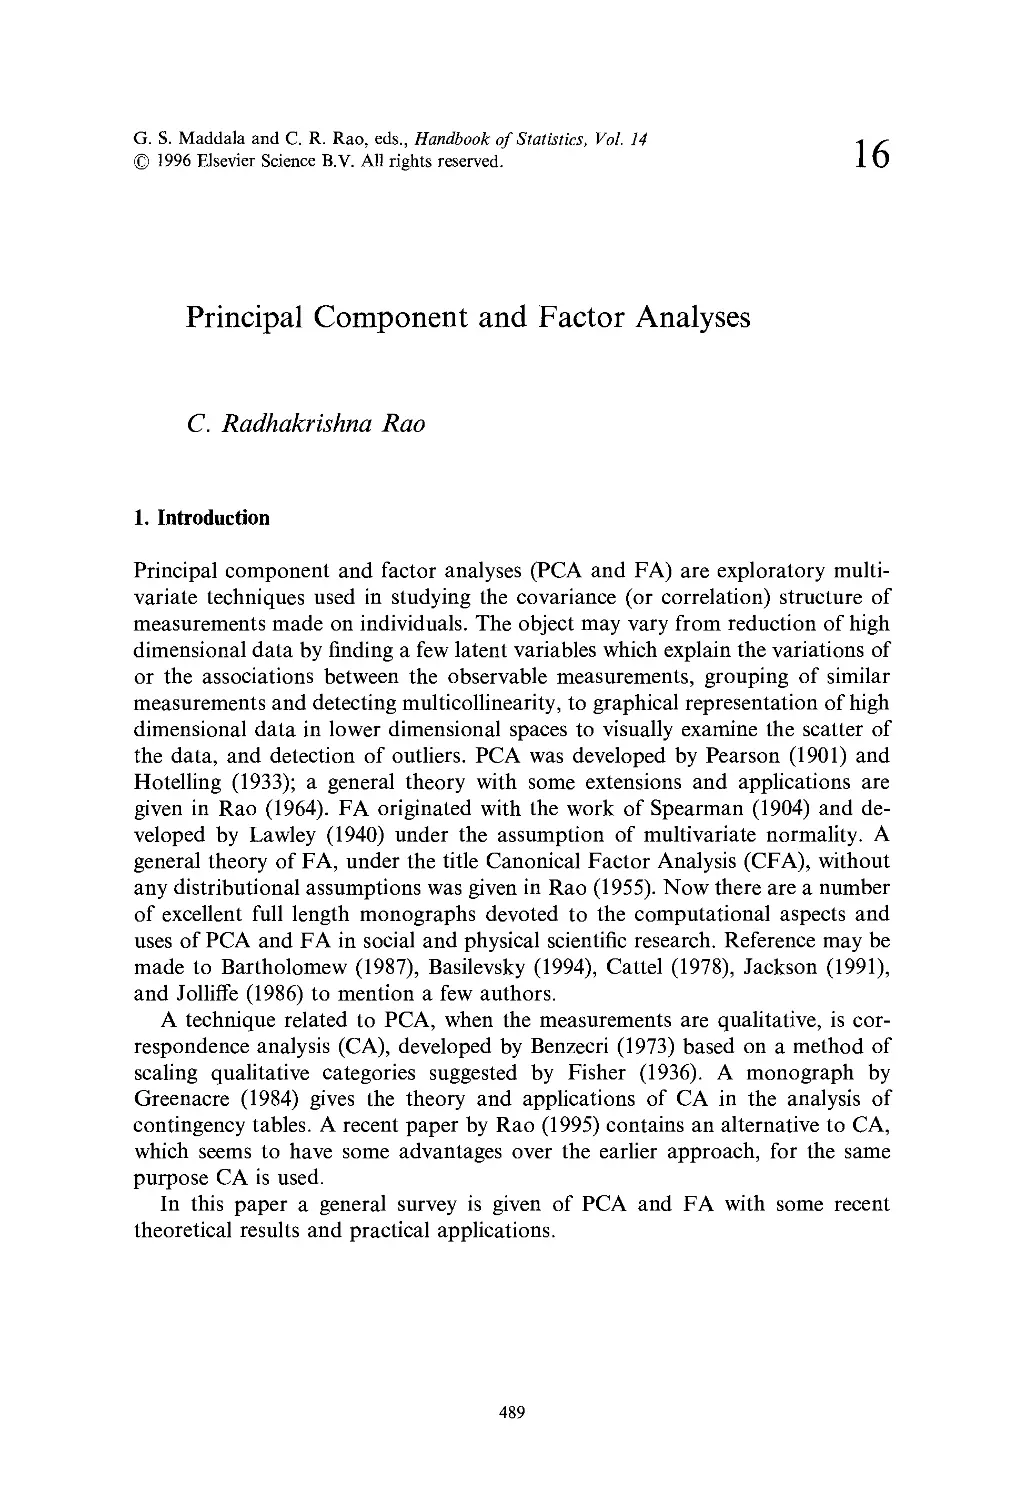 16. Principal Component and Factor Analyses